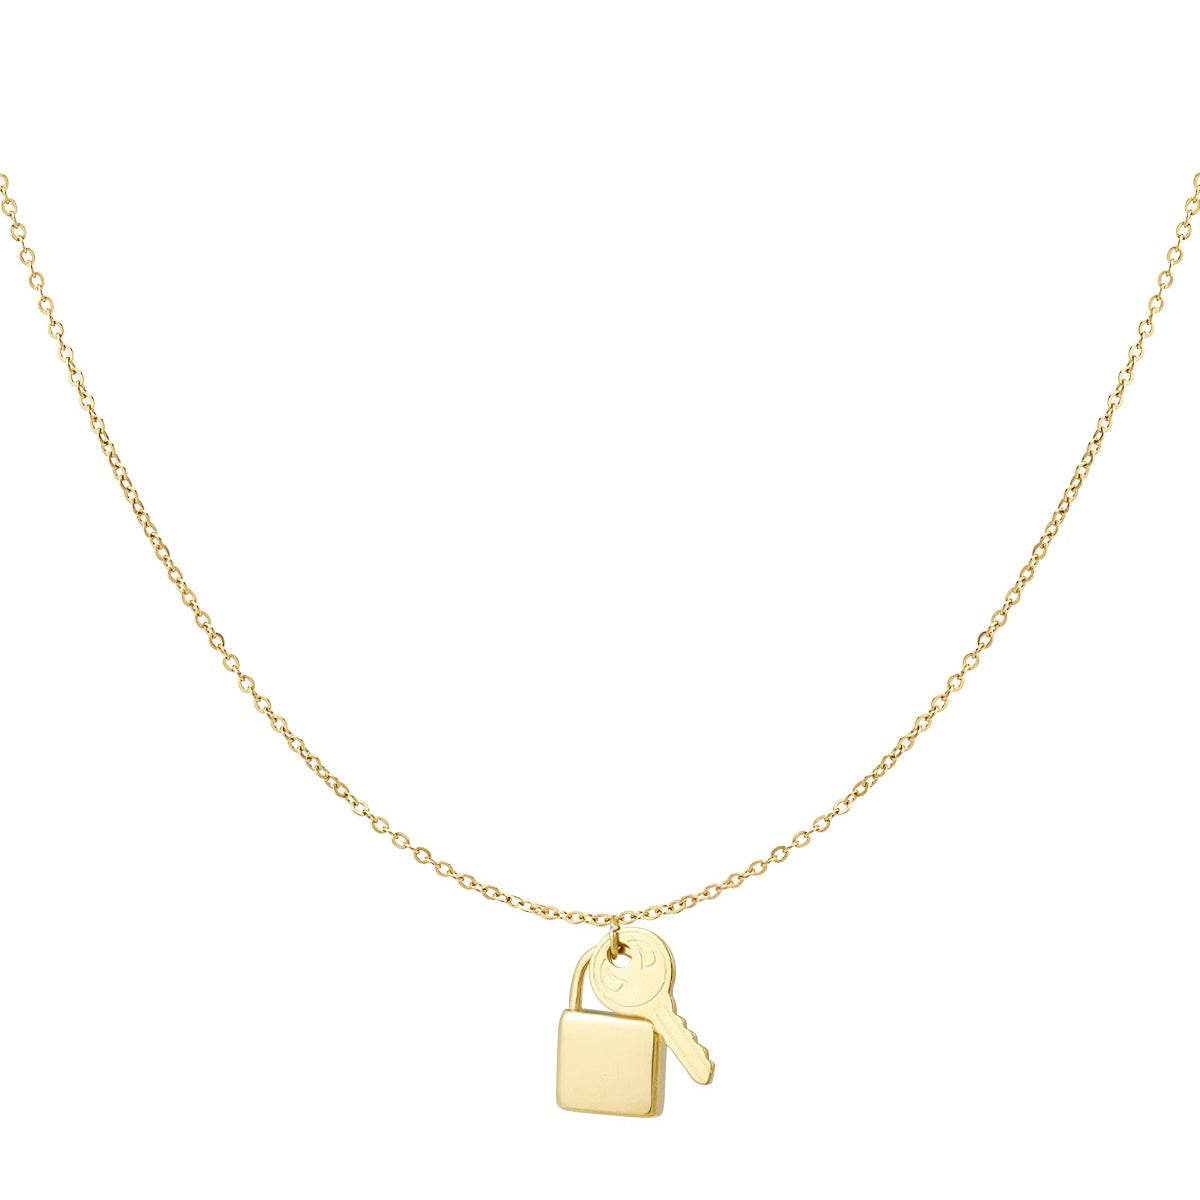 My Love Necklace - Gold